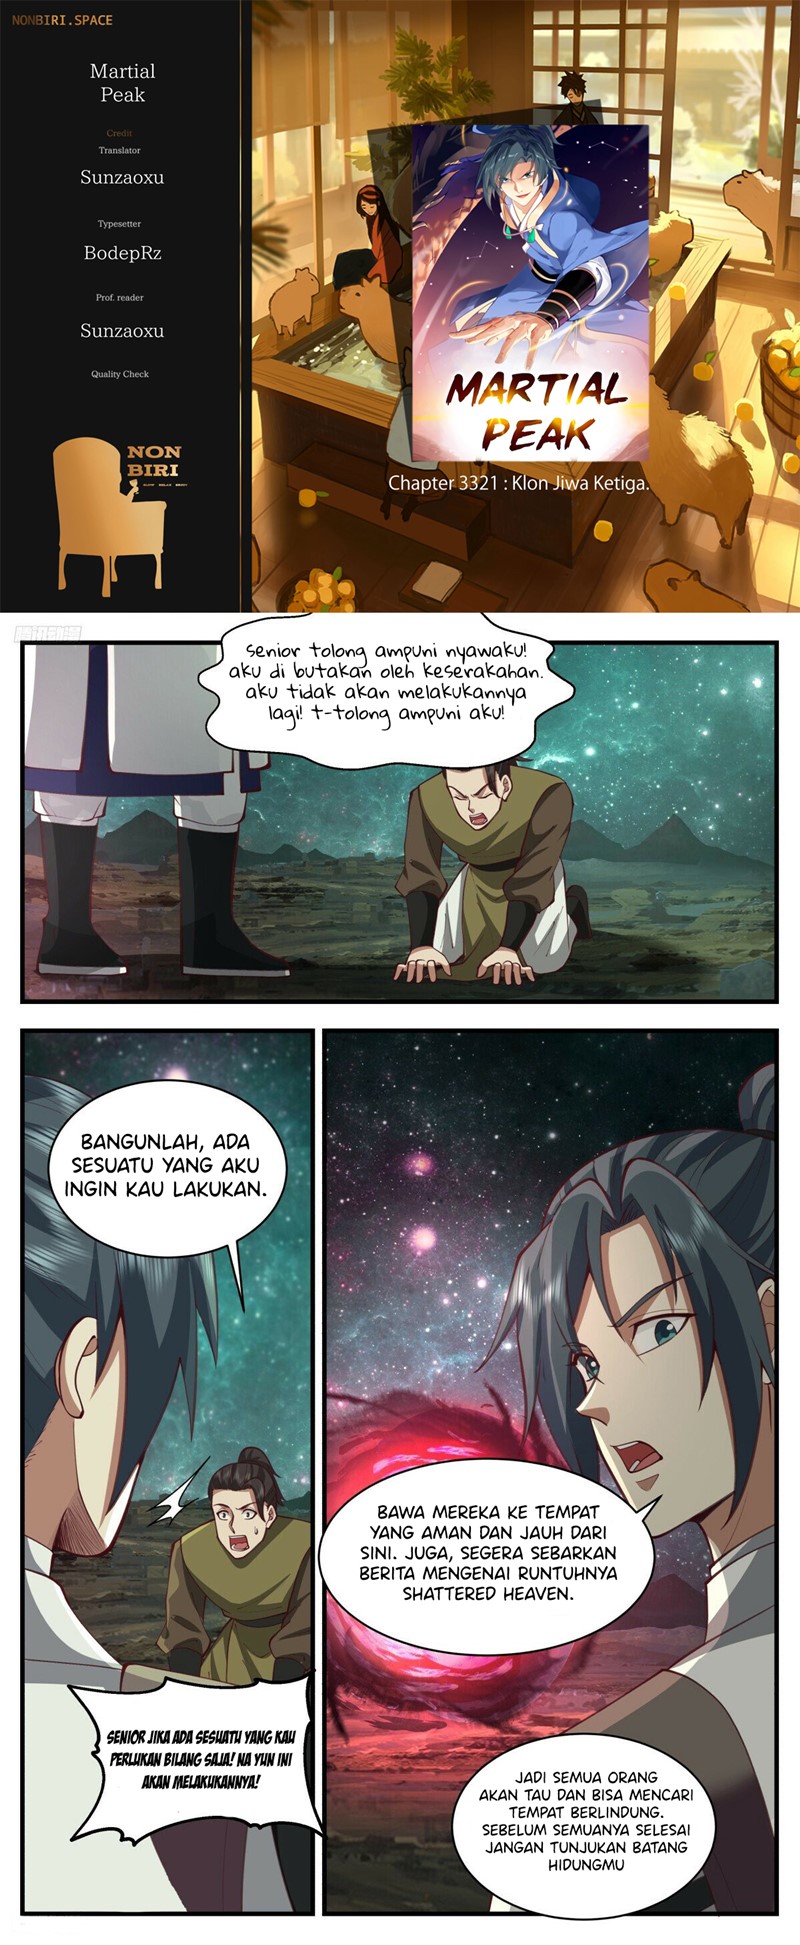 Martial Peak: Chapter 3321 - Page 1